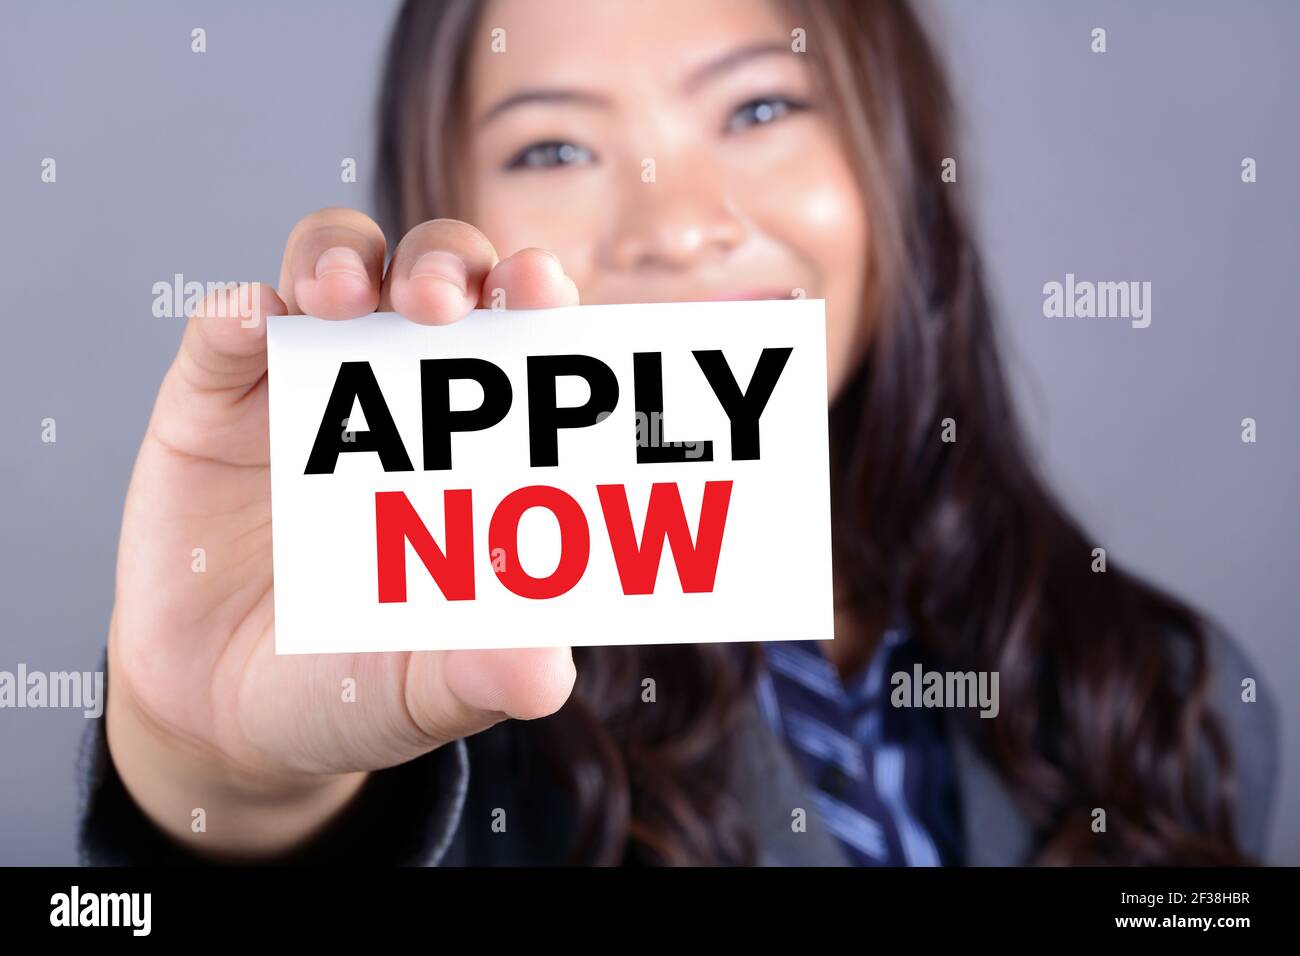 APPLY NOW, message on the card shown by a woman Stock Photo